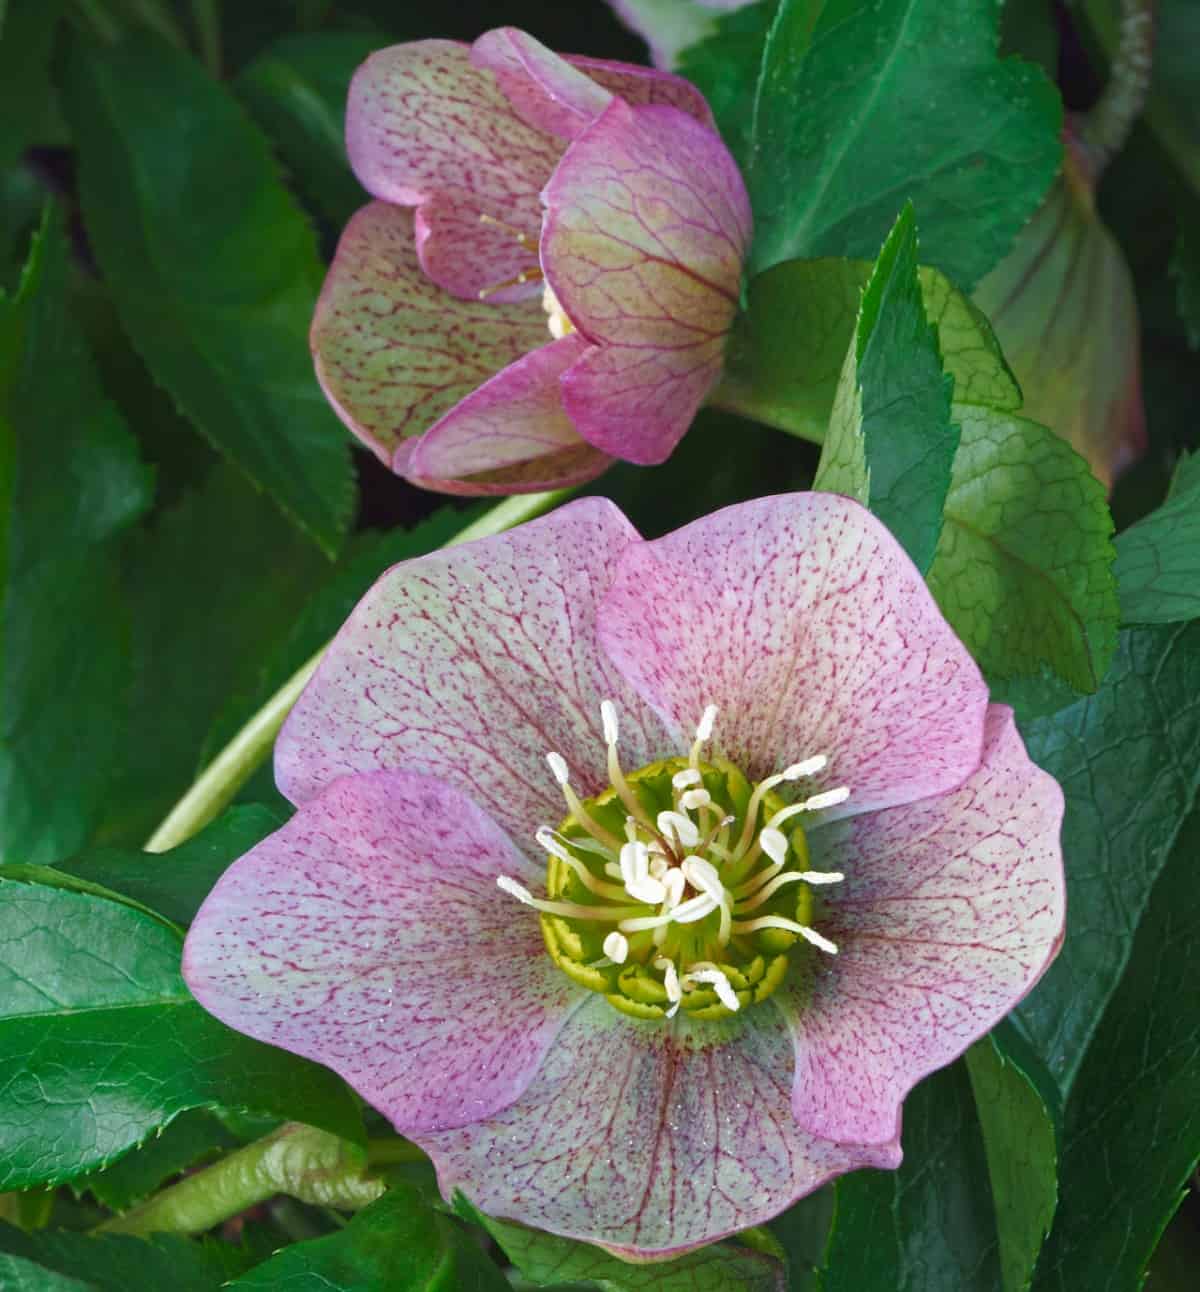 The lenten rose is a perennial that blooms in early spring.